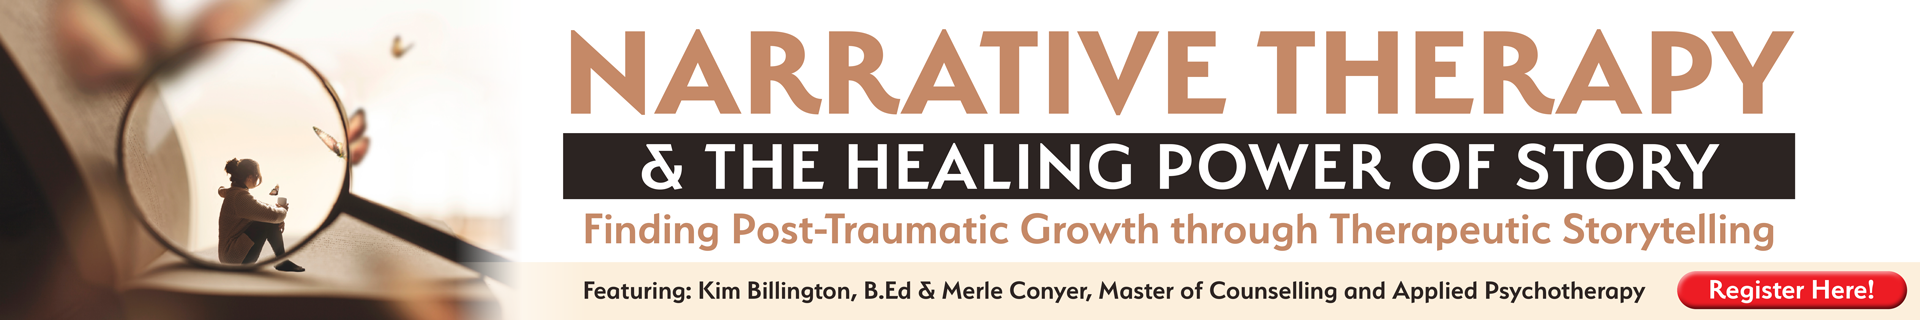 Narrative Therapy & the Healing Power of Story: Finding Post-Traumatic Growth through Therapeutic Storytelling